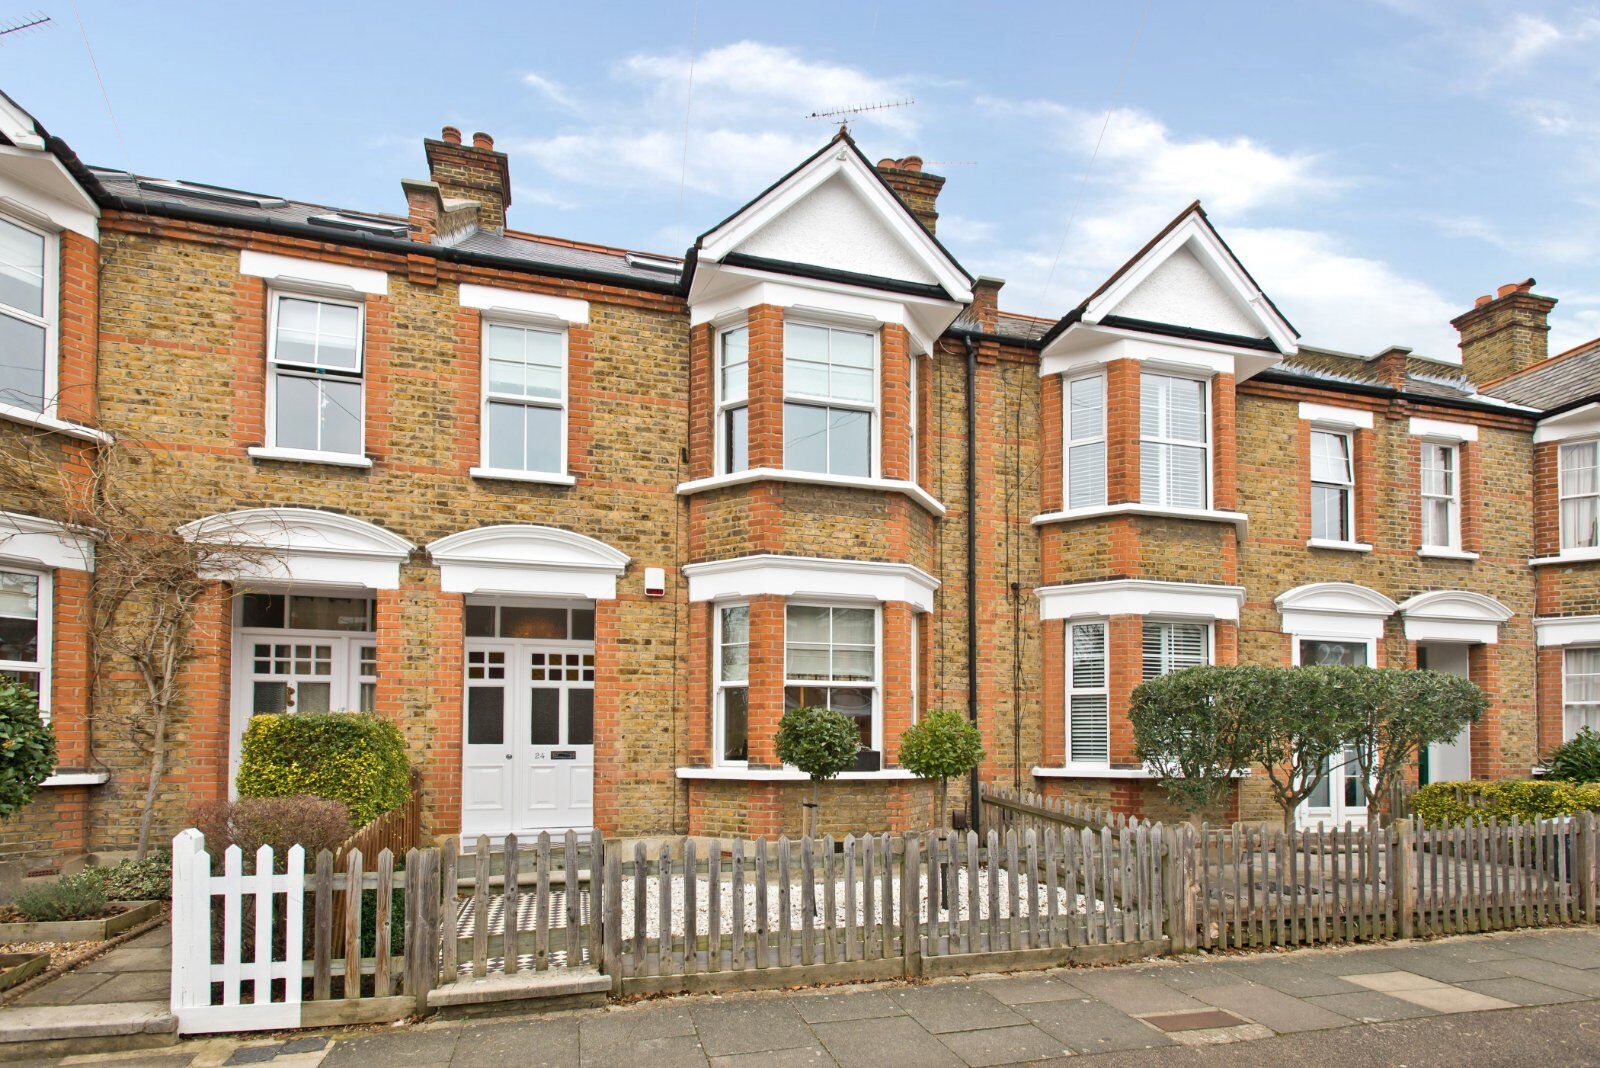 4 bedroom mid terraced house for sale Pendarves Road, West Wimbledon, SW20, main image